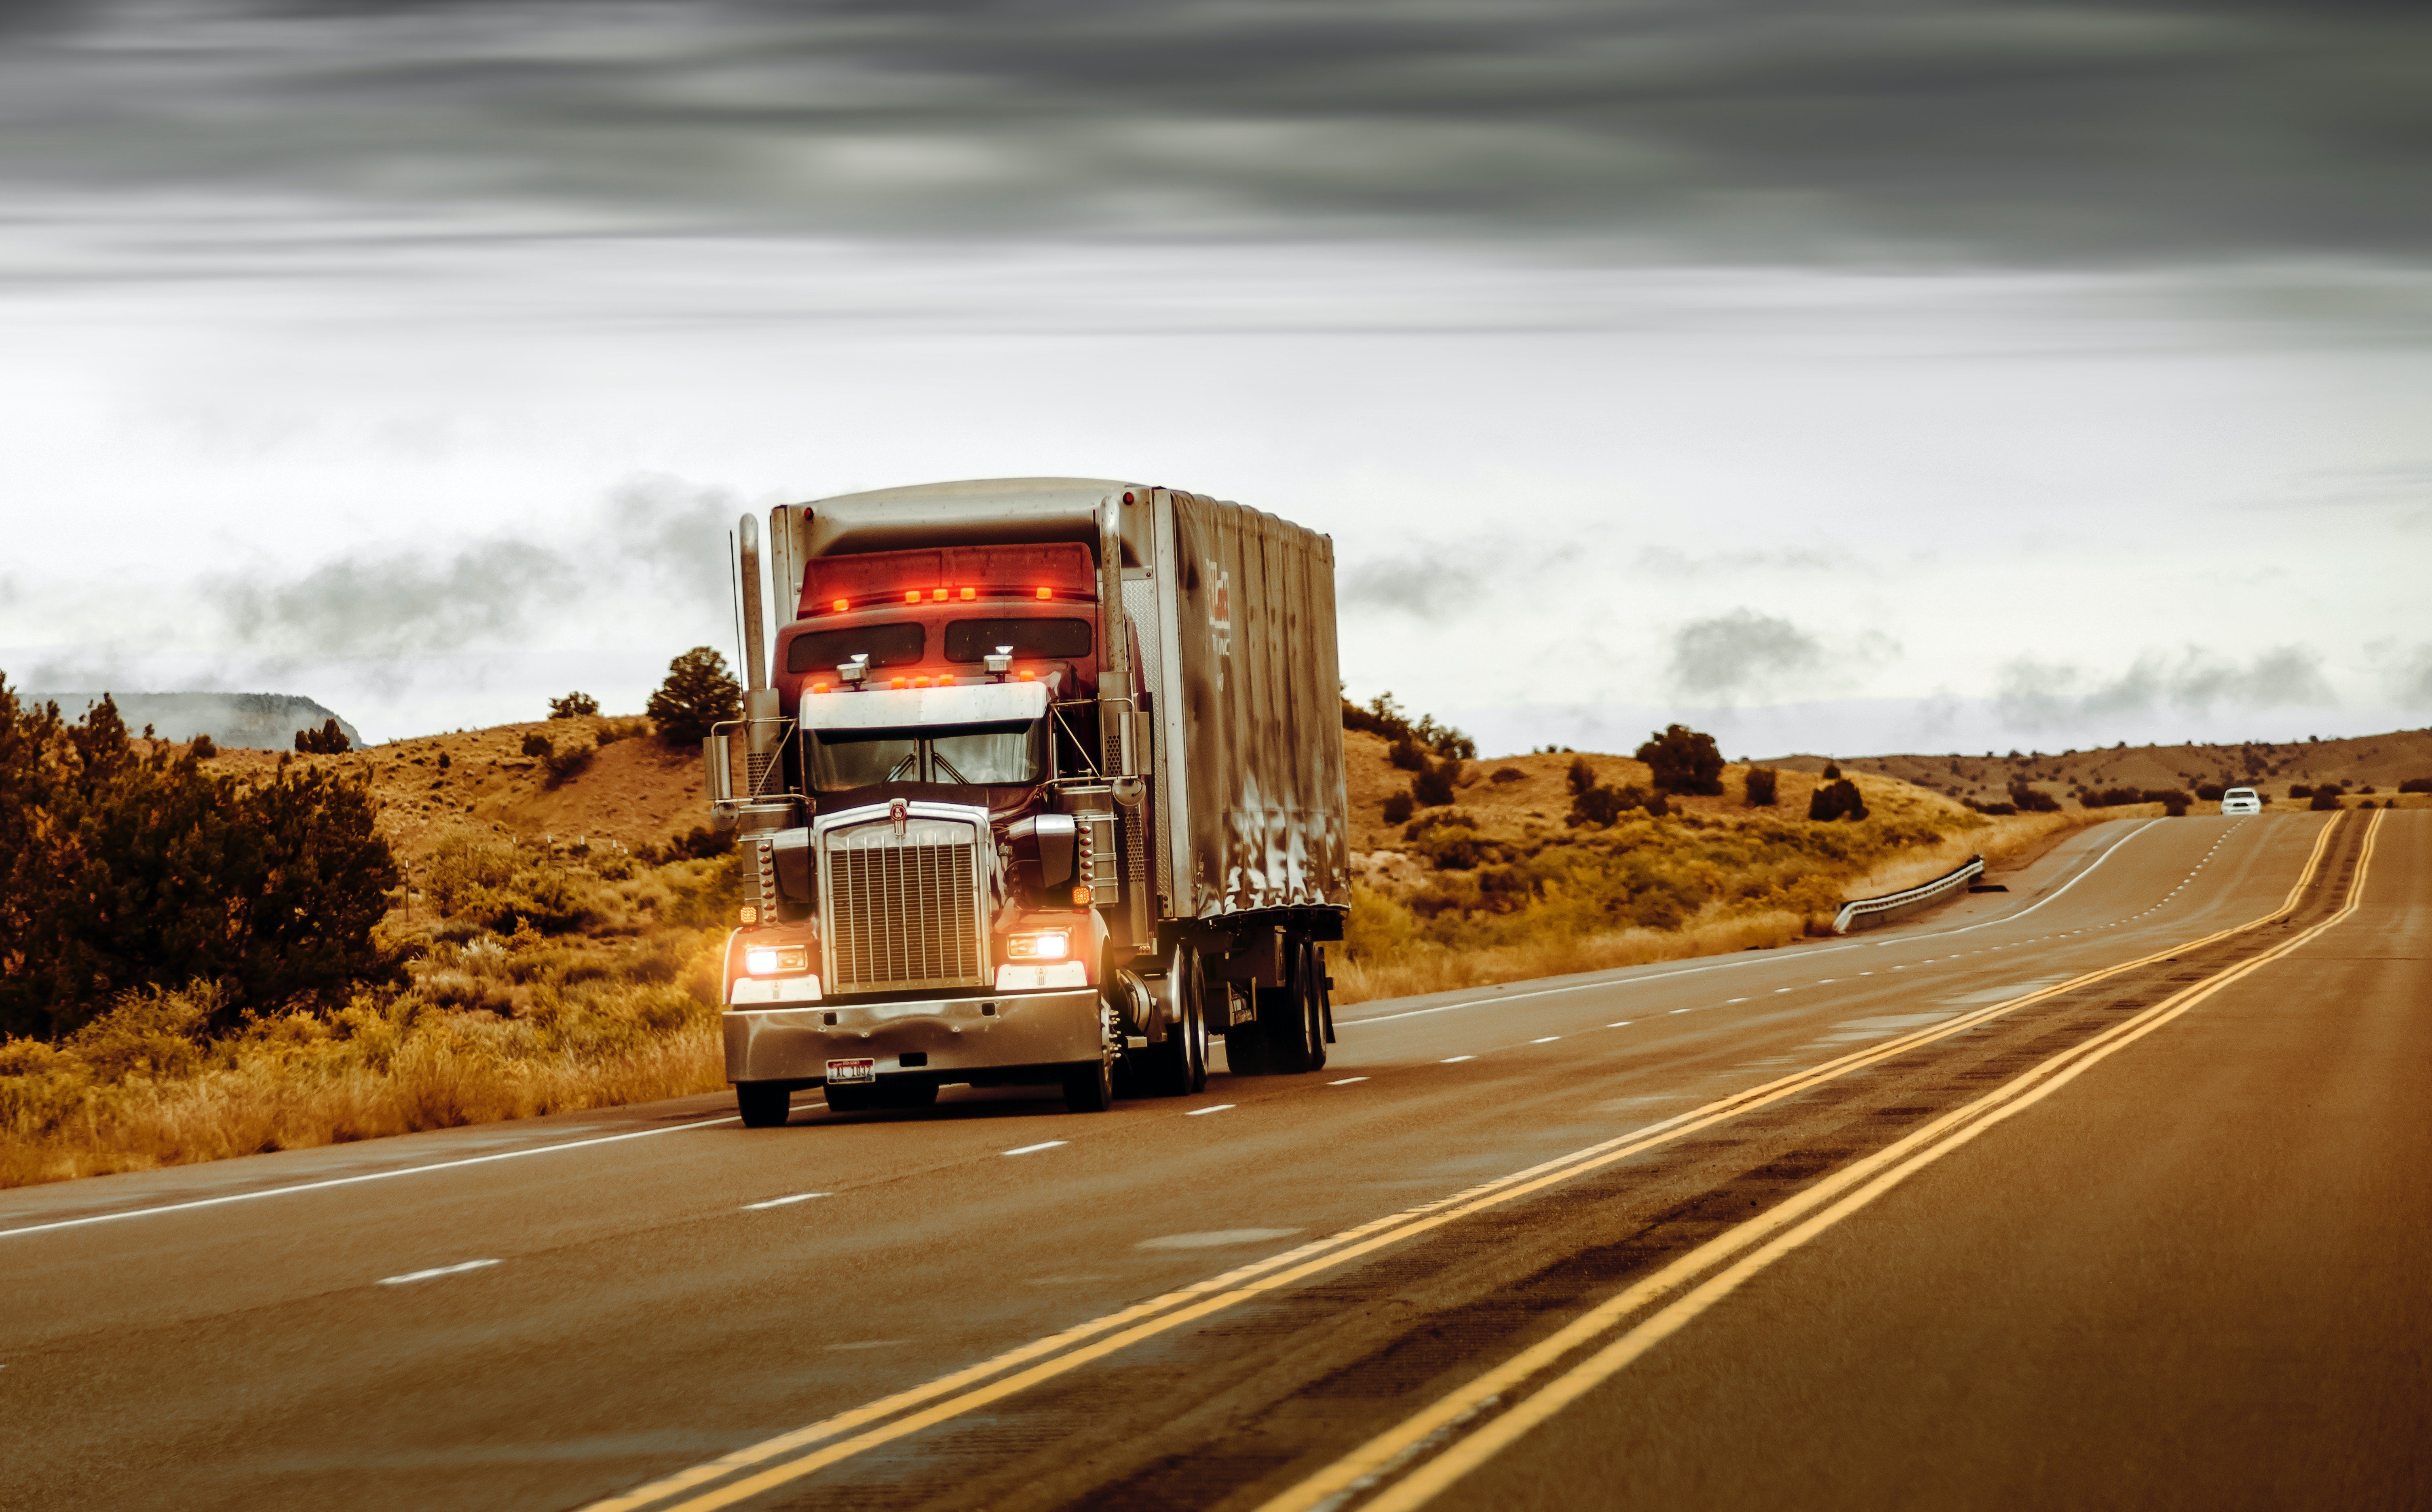 Pictured - An image of a white and brown truck on the road | Source: Pexels 